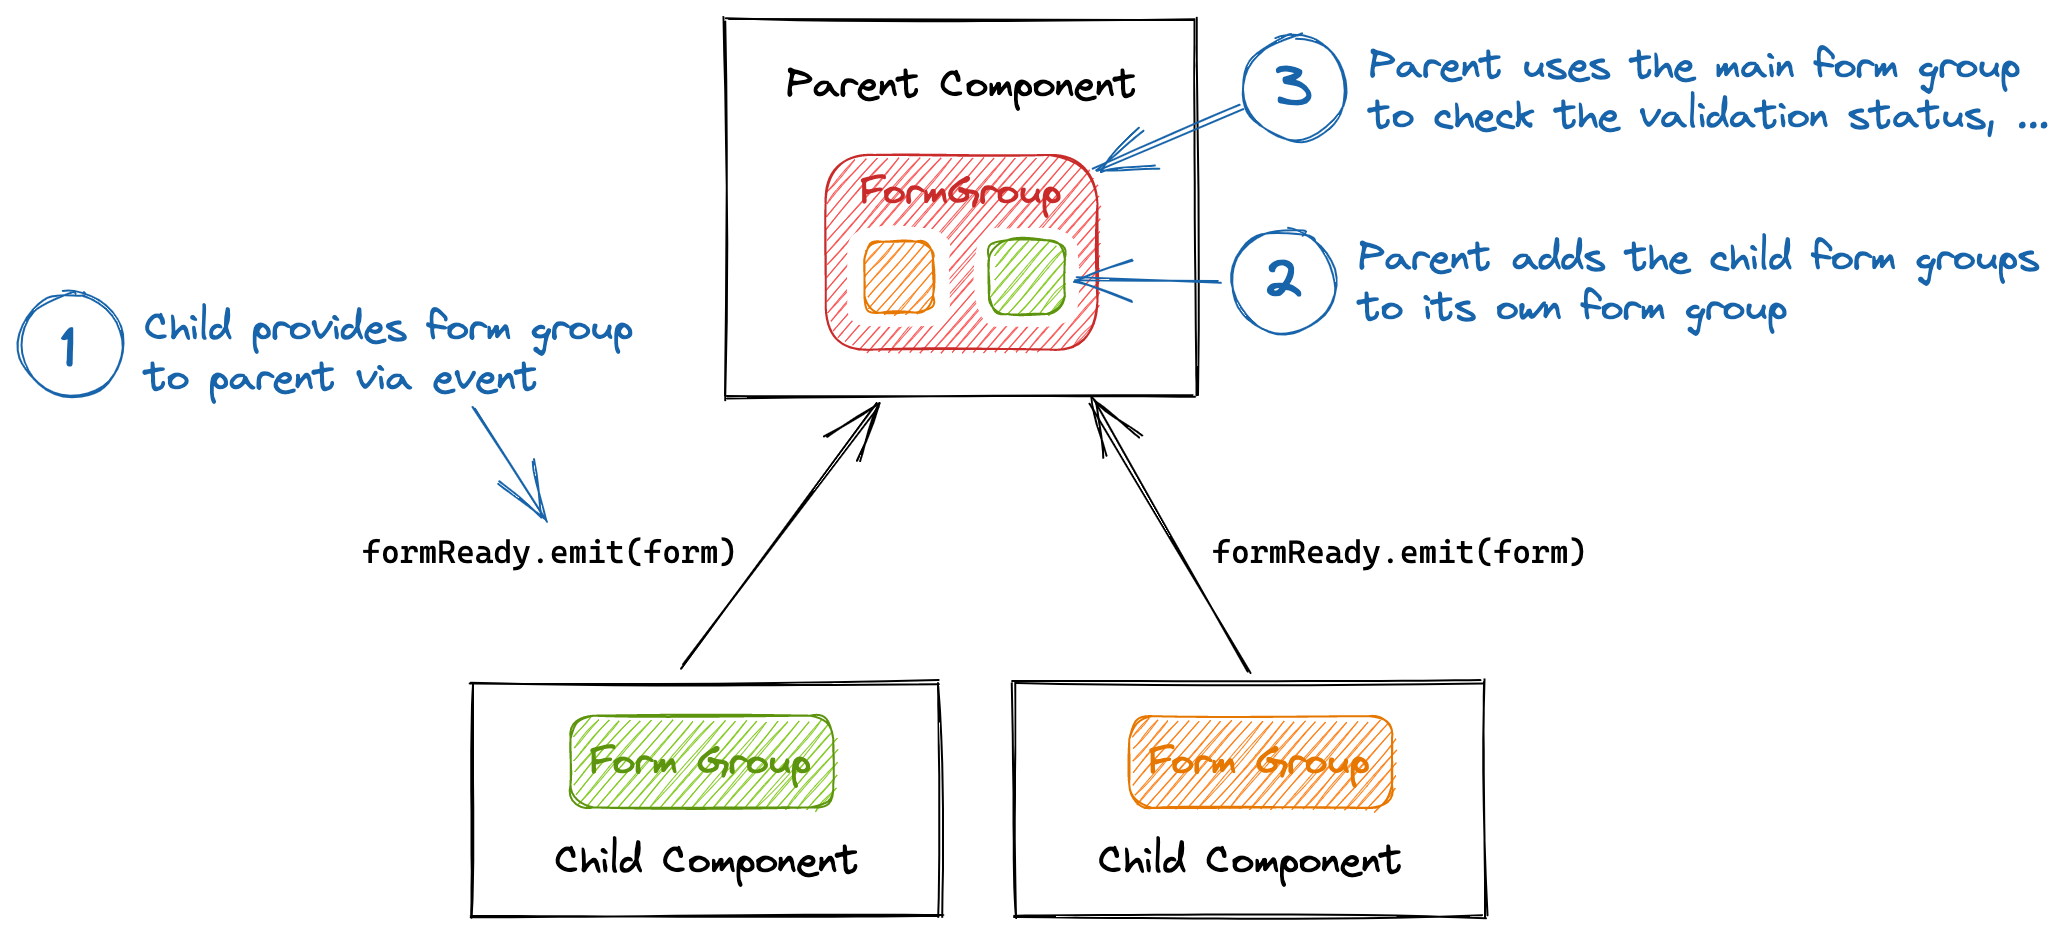 Architecture overview that shows the parent component with a form group and two child components with their own form groups.